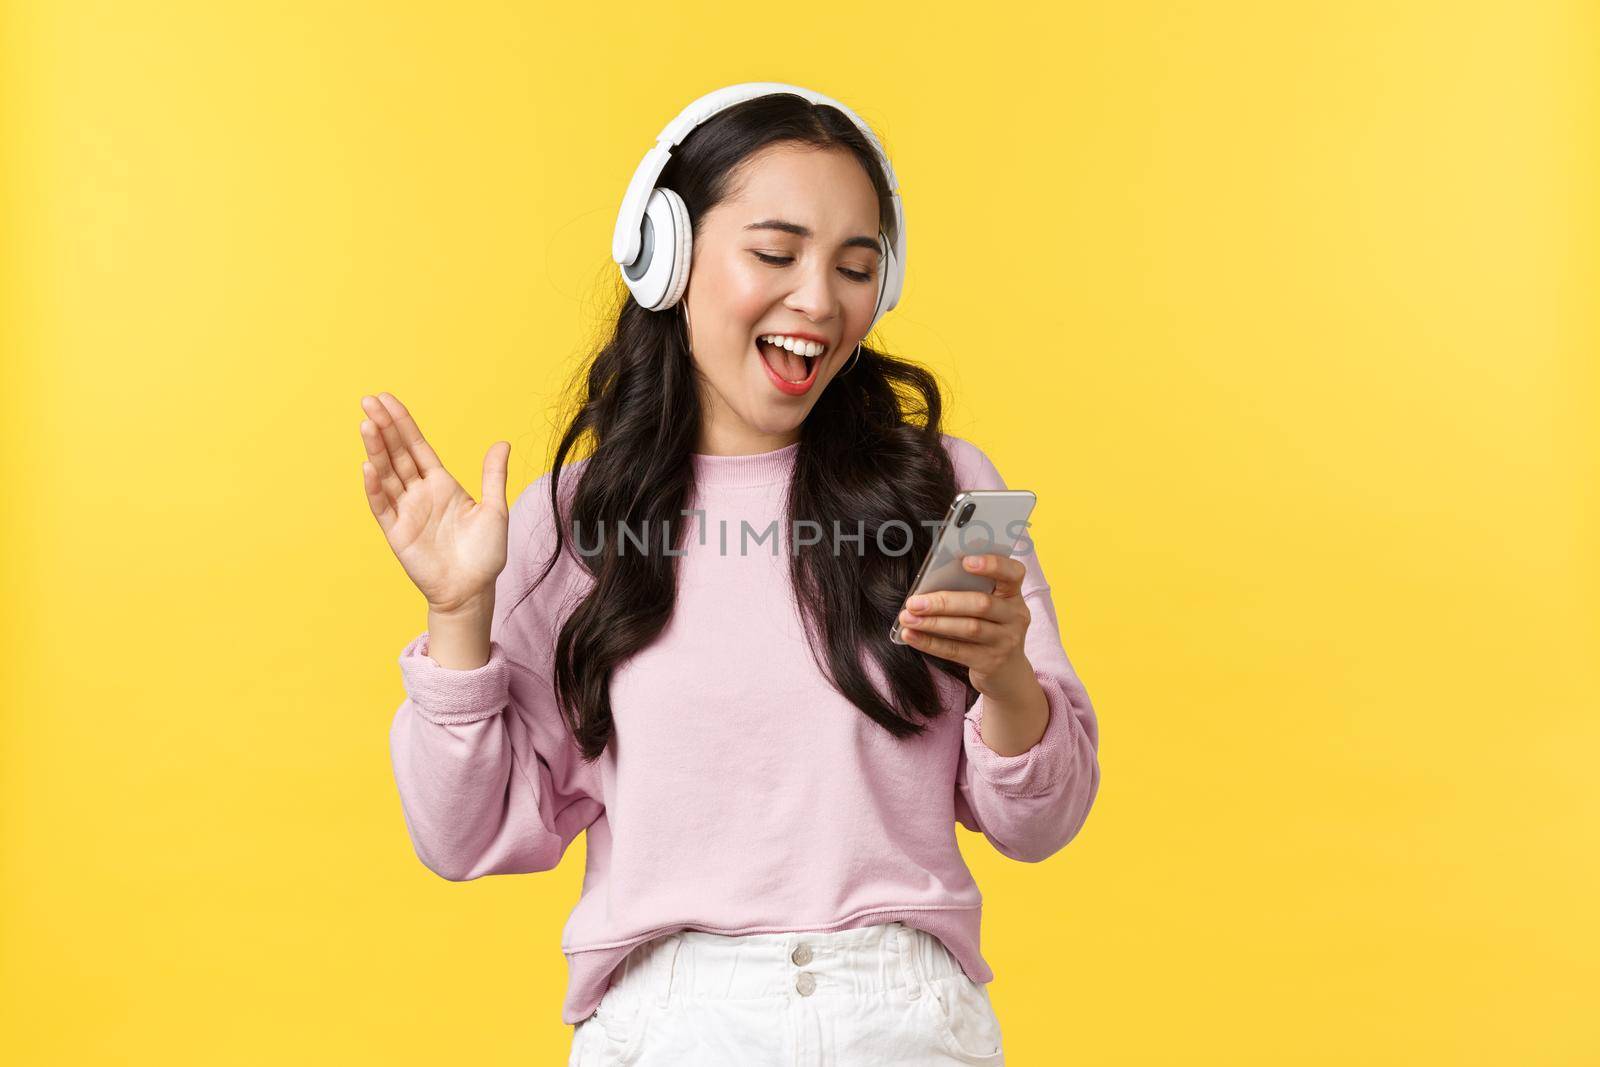 People emotions, lifestyle leisure and beauty concept. Smiling happy and carefree asian girl singing karaoke app in headphones, reading song from mobile phone, standing yellow background.